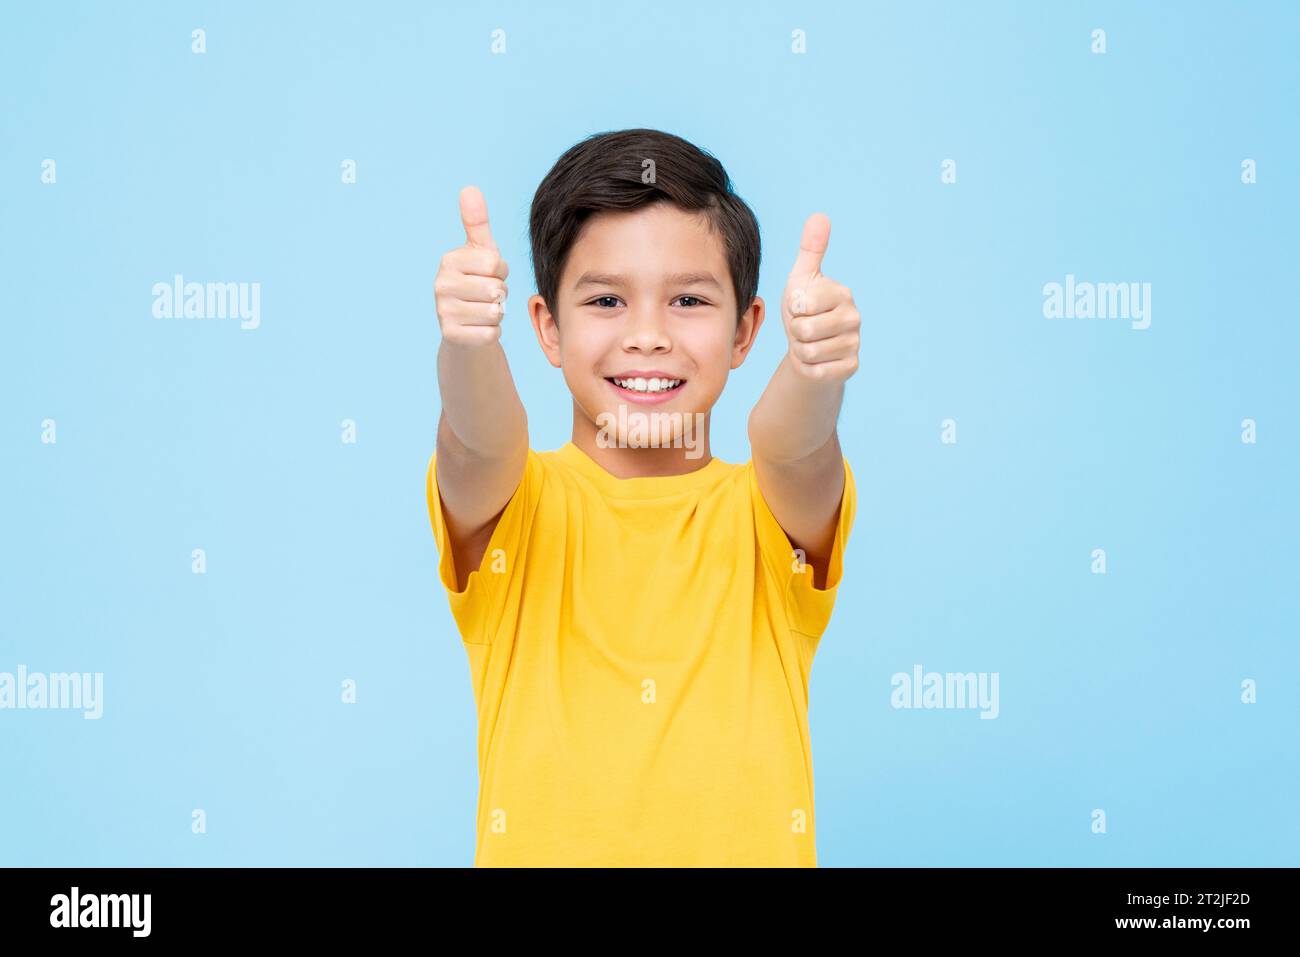 Happy mixed race boy in yellow t shirt smiling and looking at camera while showing thumbs up gesture in approval against blue background Stock Photo